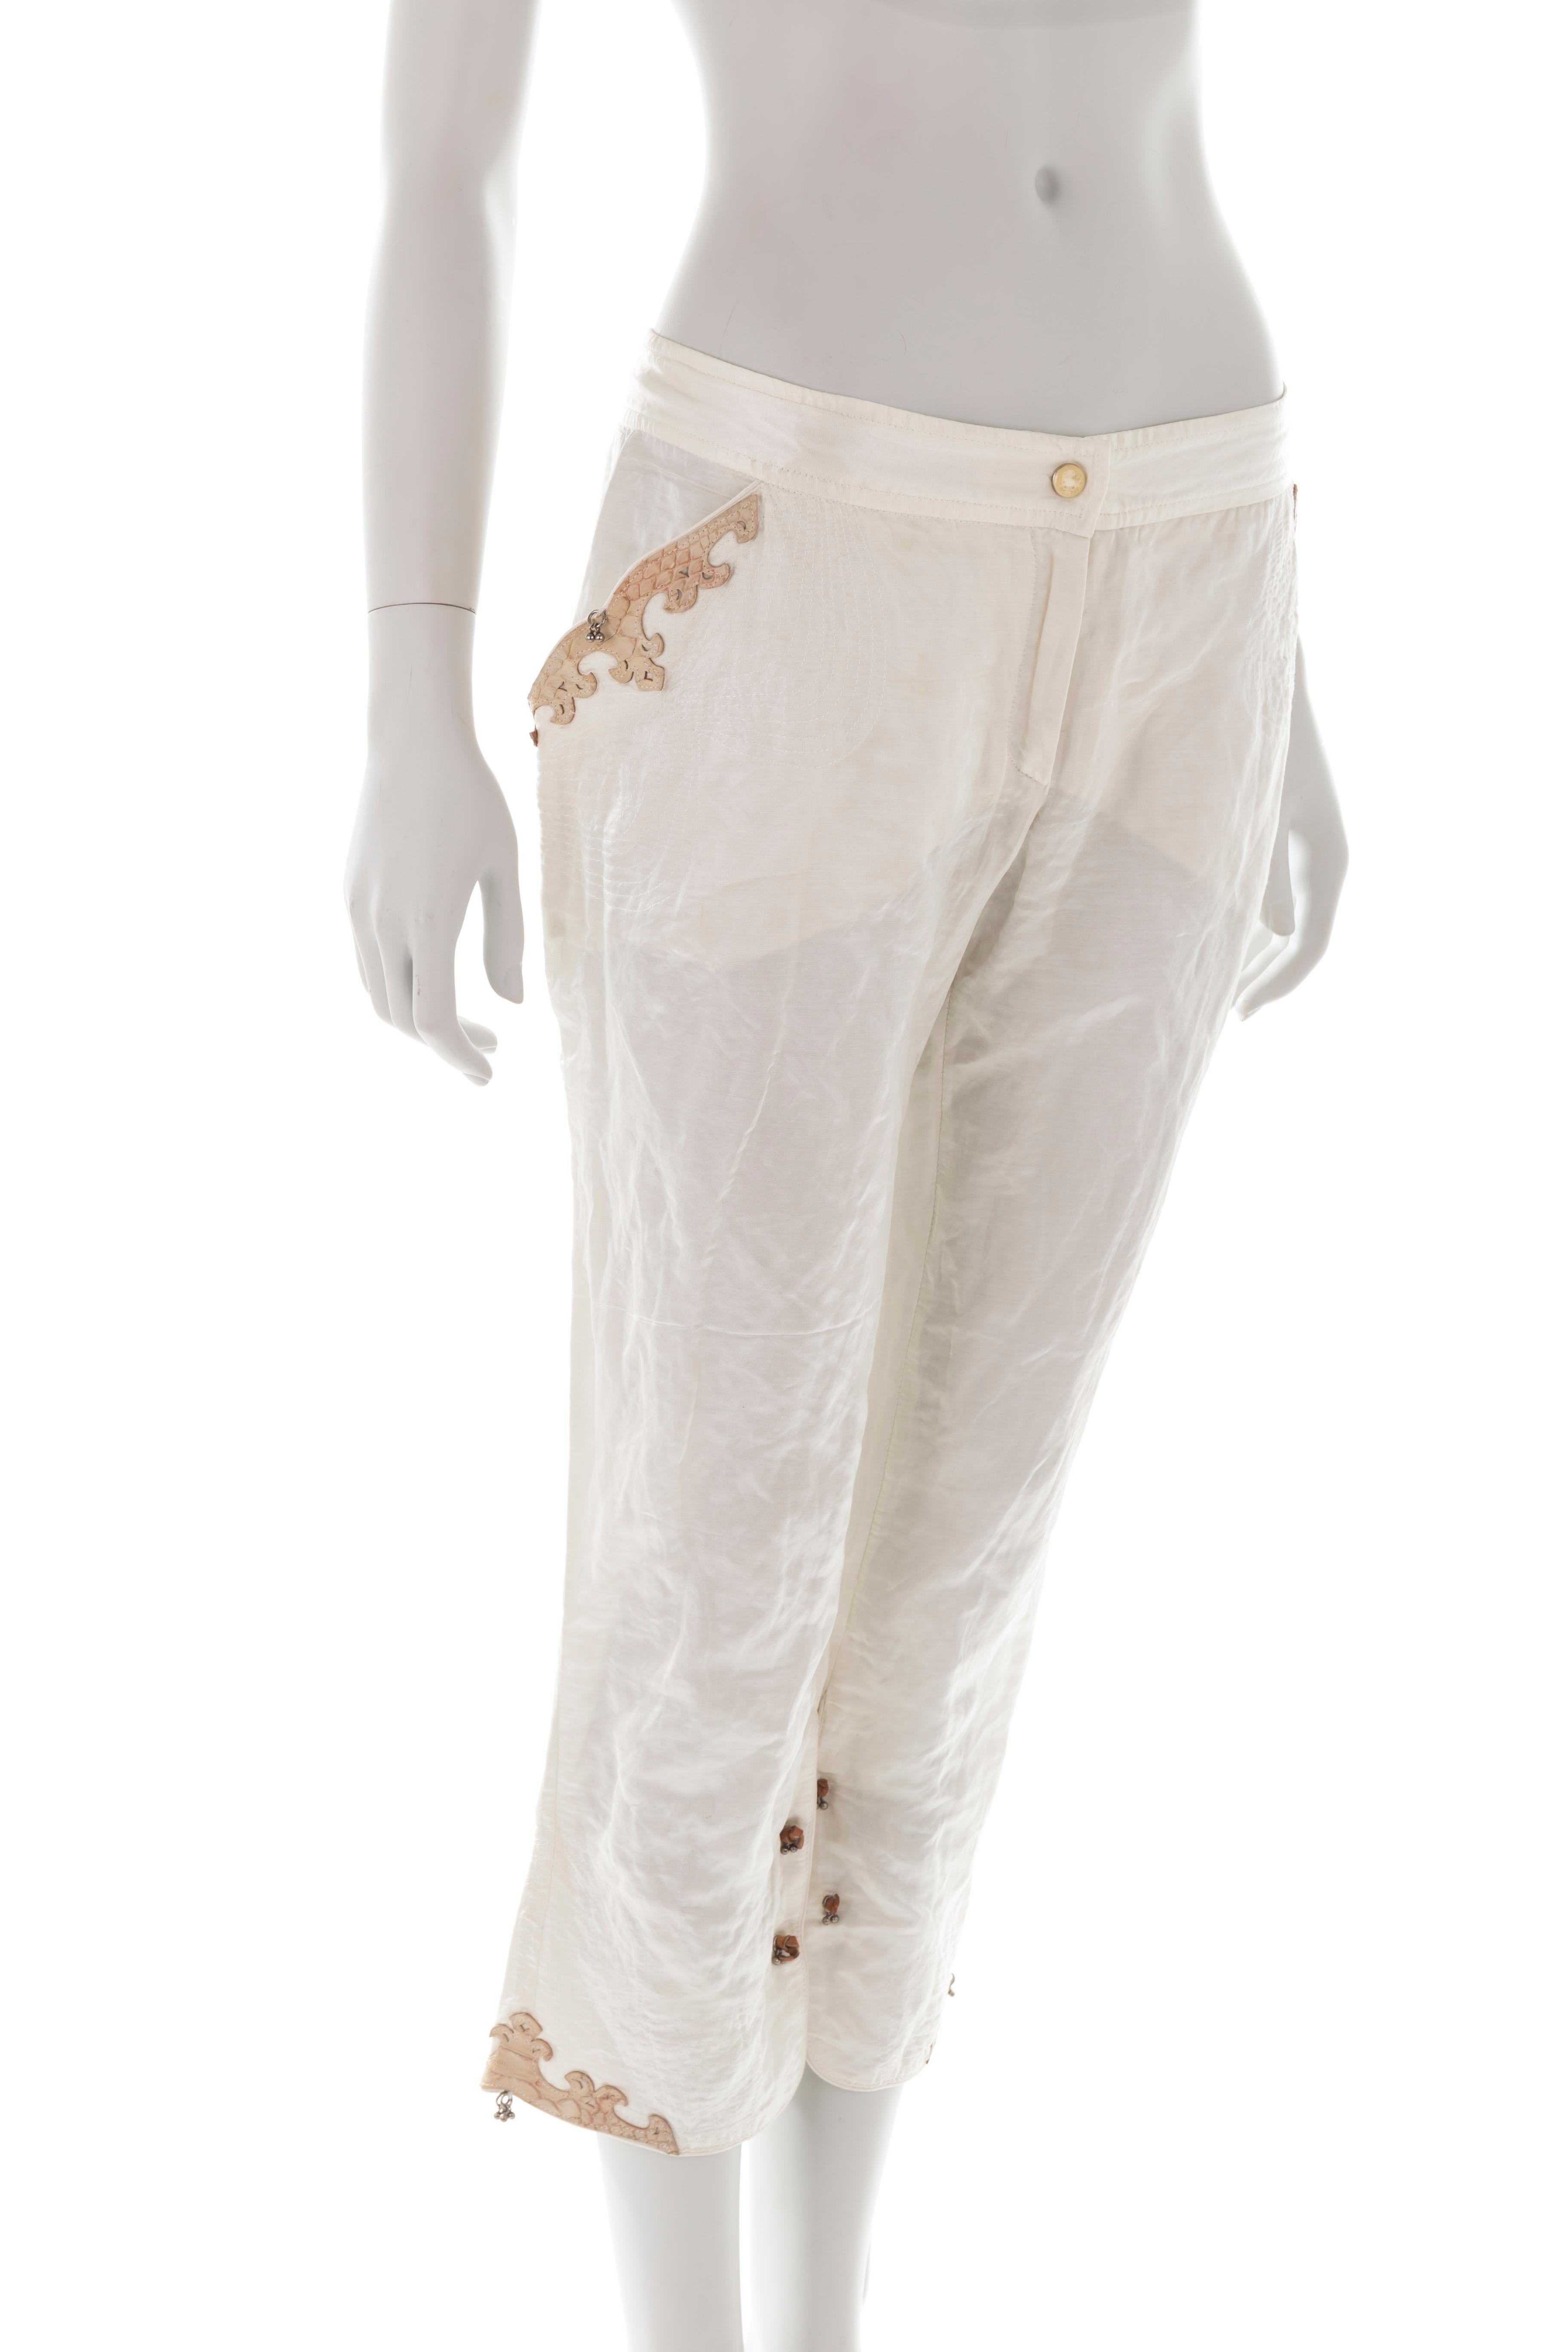 - Ermanno Scervino silk capri pants
- Sold by Gold Palms Vintage
- Mid 2000s
- Python leather appliques 
- Hook cuffs
- Size 44
- The garment has been pinned on the waist and hips to fit the mannequin
